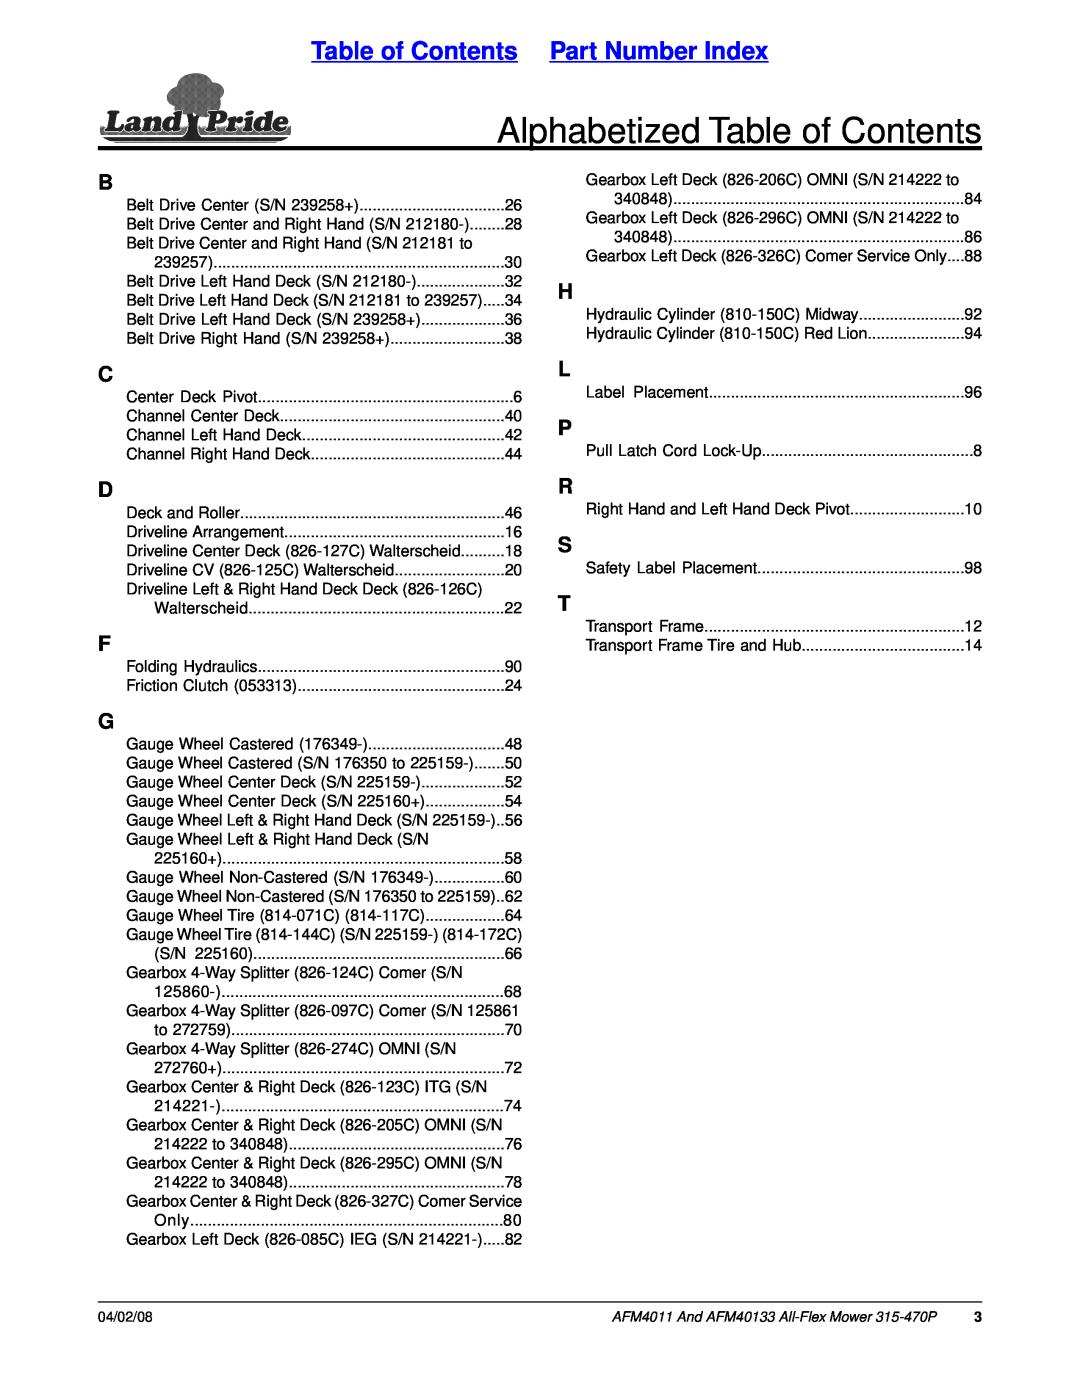 Land Pride AFM40133, AFM4011 manual Alphabetized Table of Contents, Table of Contents Part Number Index 